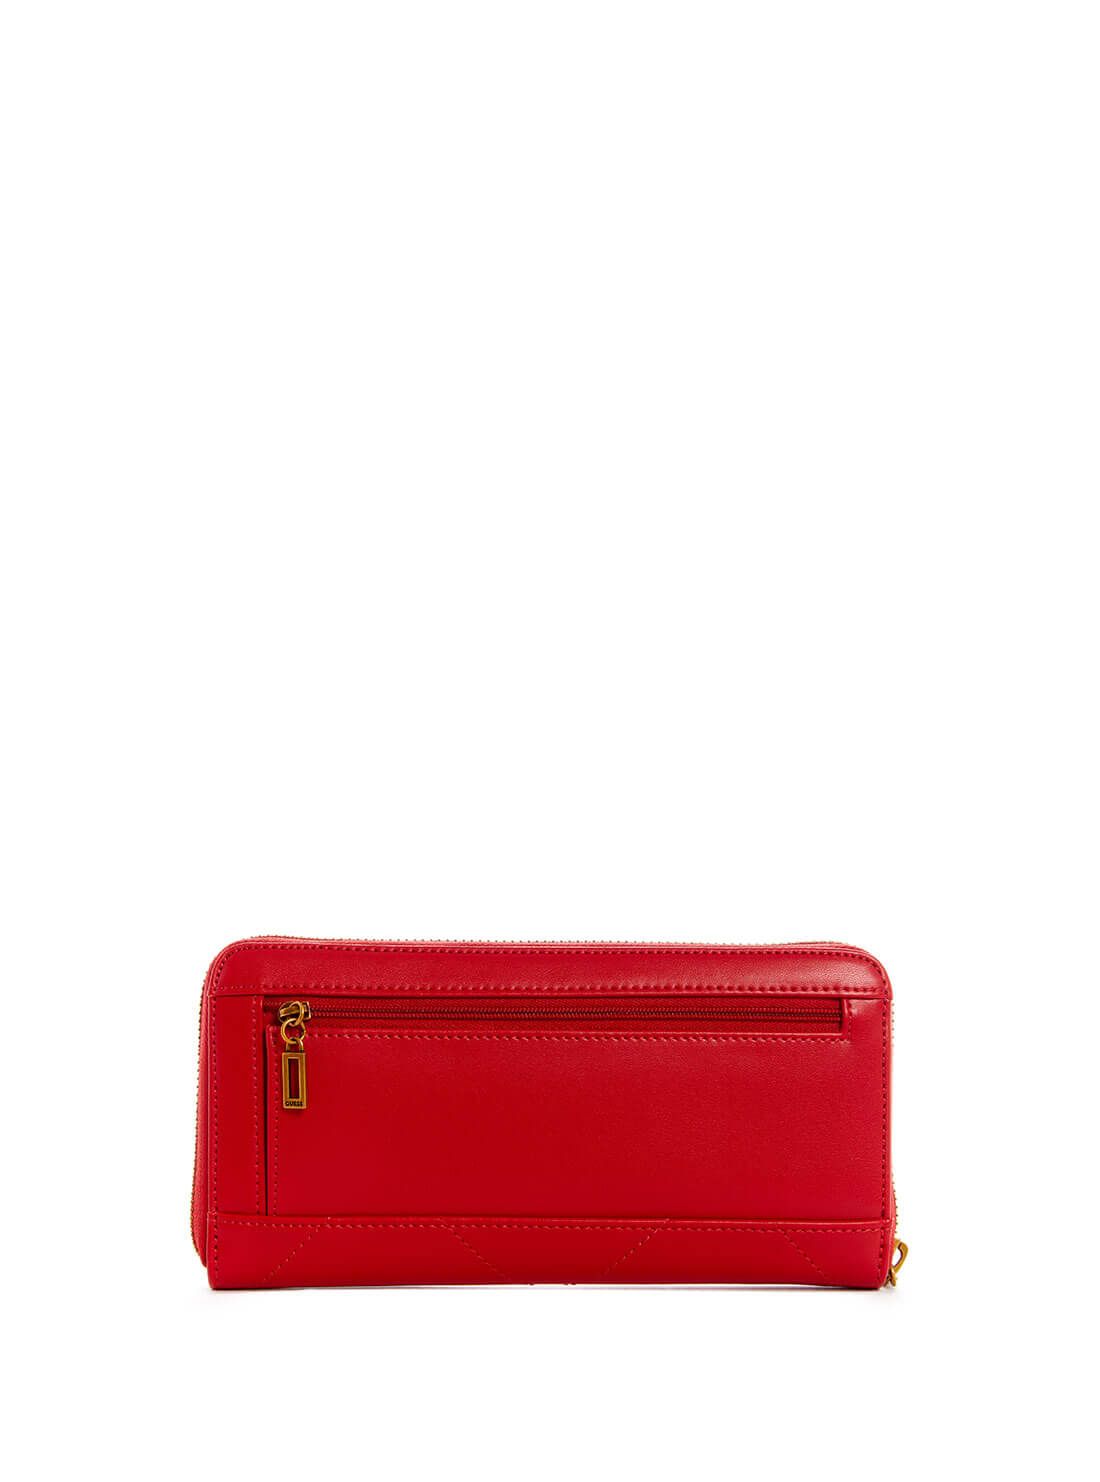 GUESS Womens Red Katey Large Wallet QA787046 Back View